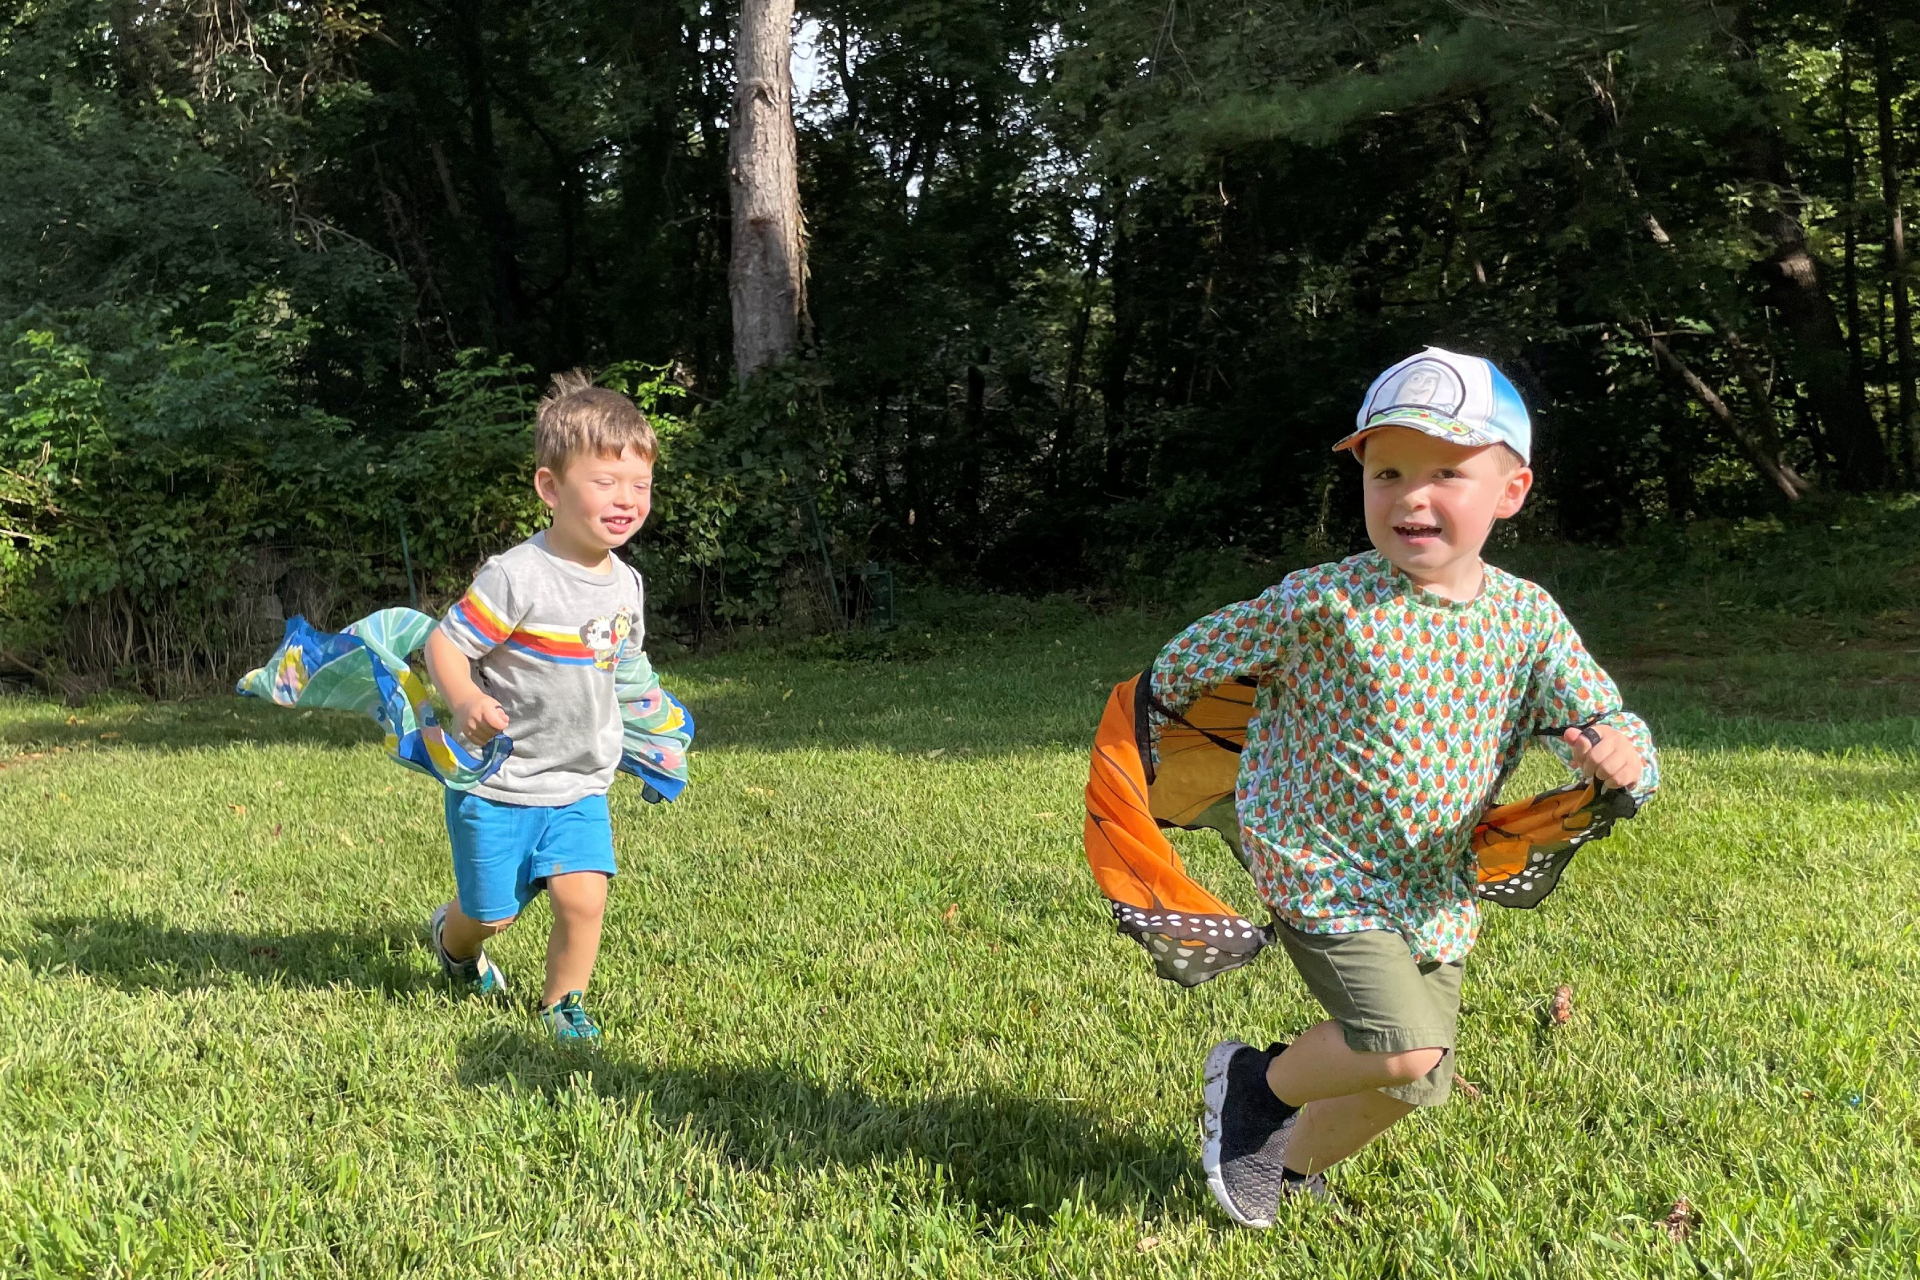 Two children run through the grass, trailing cloth butterfly wings behind them.